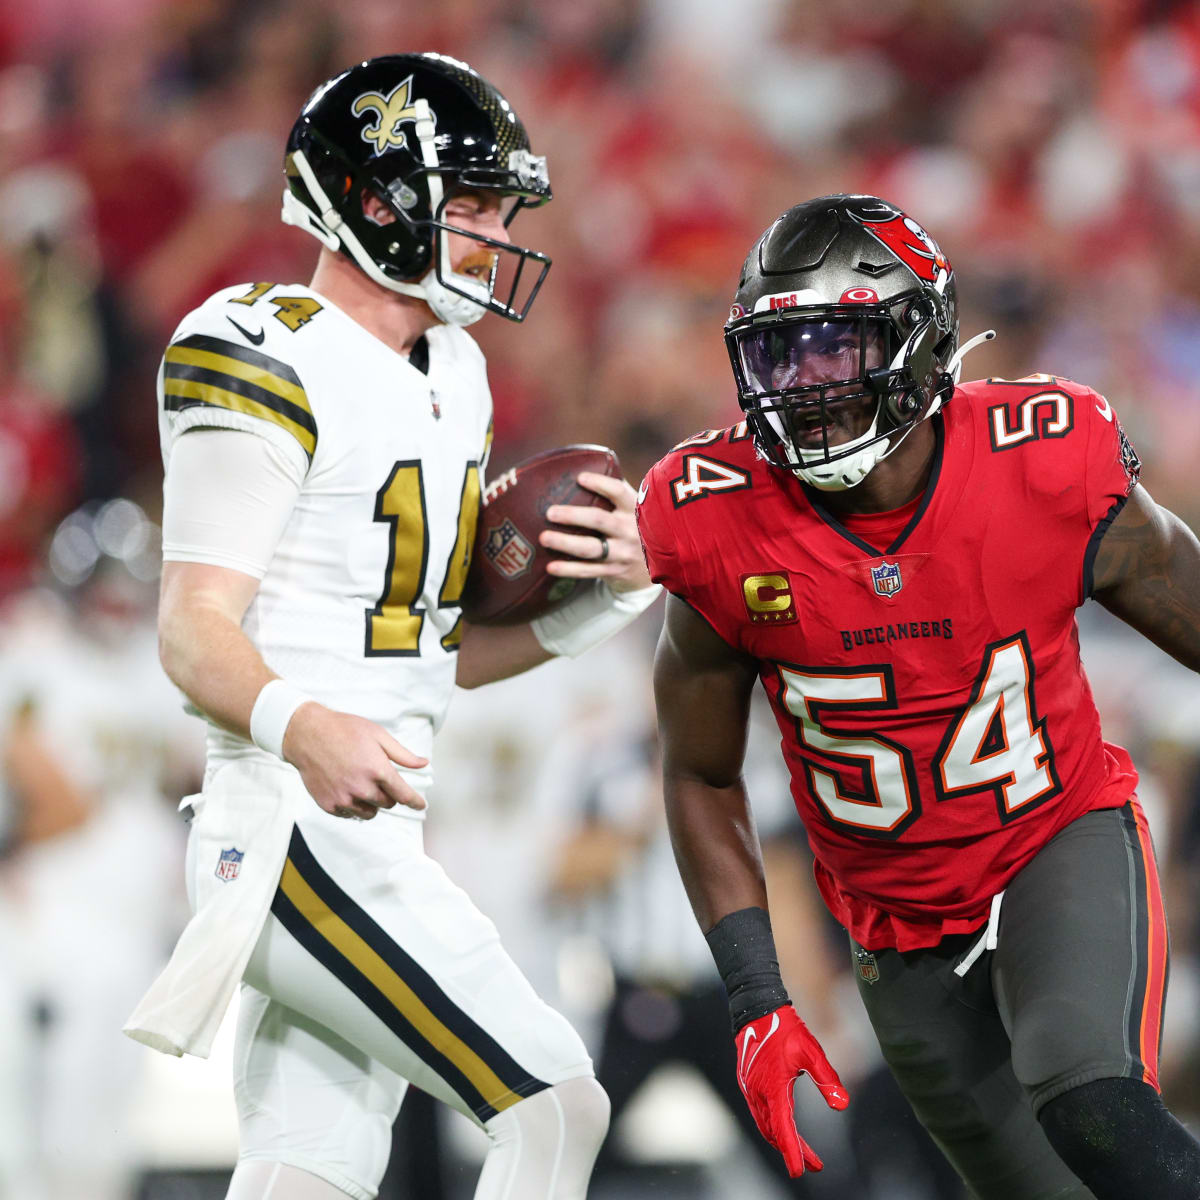 Checking in on the Buccaneers roster moves so far this offseason